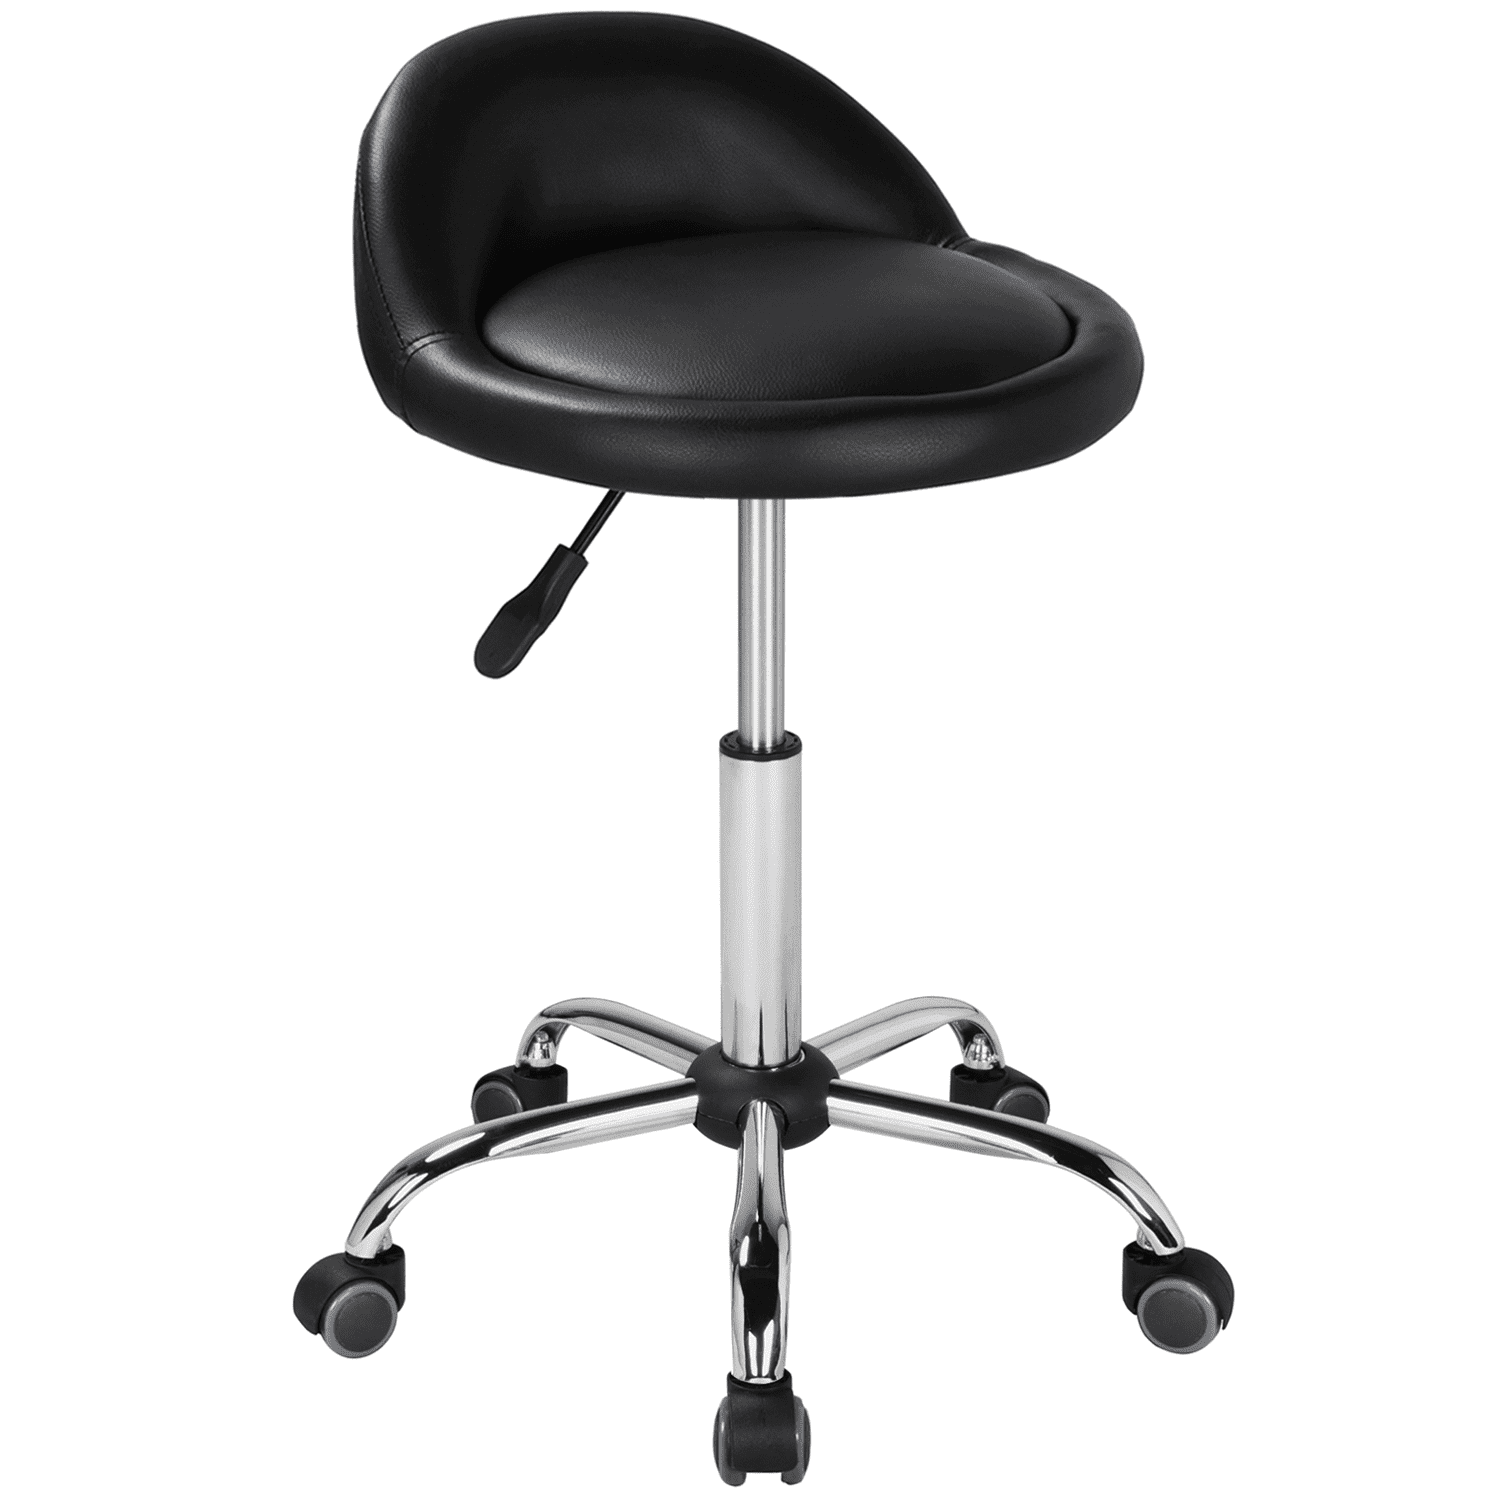 Professional Medical Spa Massage Stool Office Chair Garage Chairs Salon Stool Manicure Chair Lifting Stool with Wheels Black ❤️USA Fast Shippment❤️ Tuscom Drafting Stool with Back Cushion